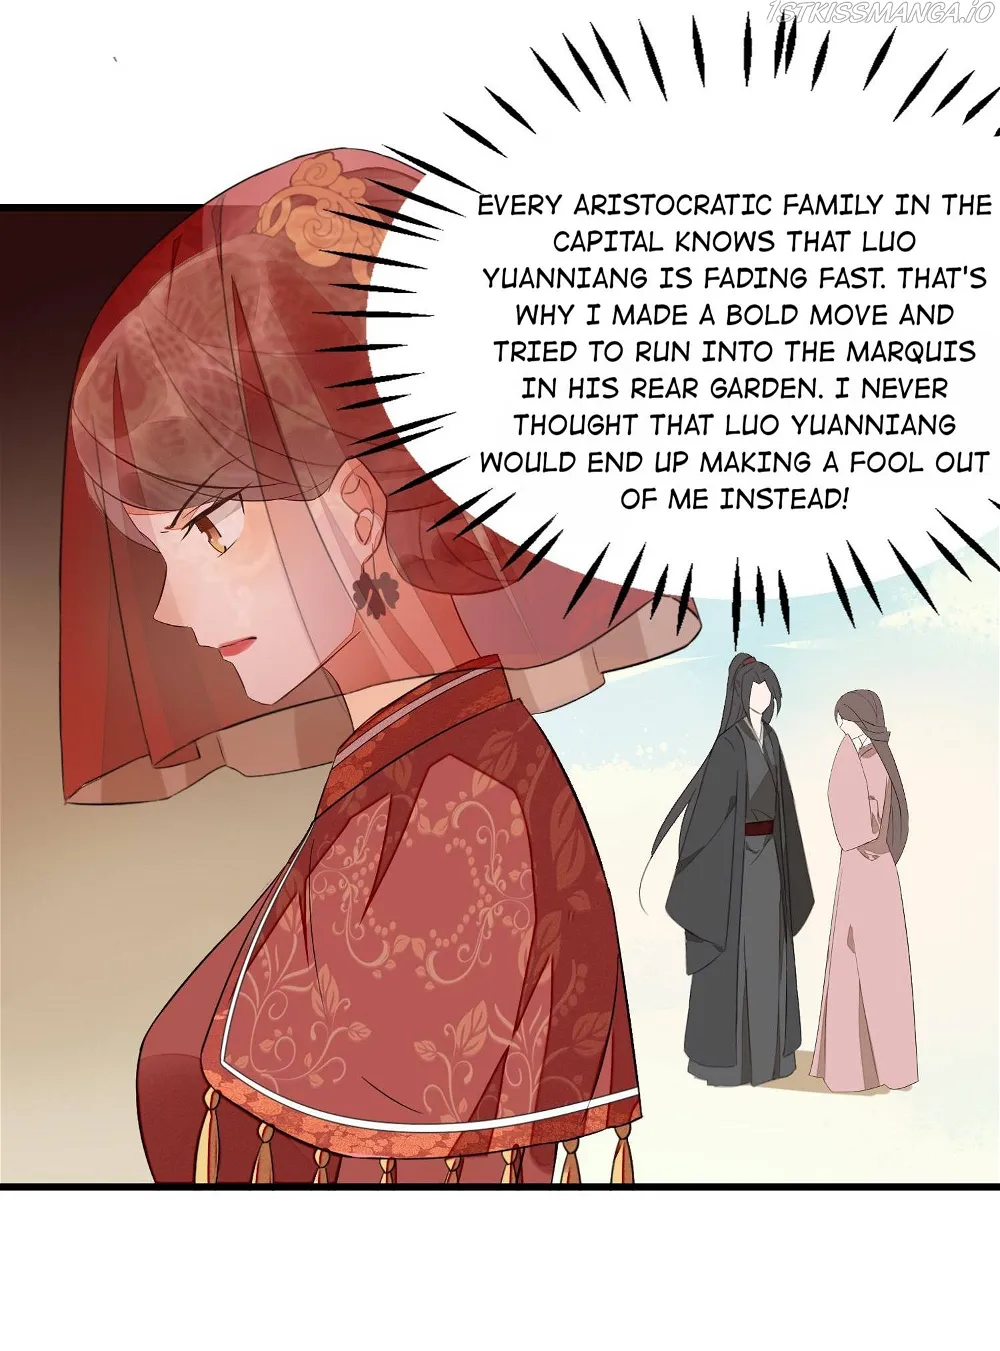 A Concubine’s Daughter and Her Tactics chapter 14